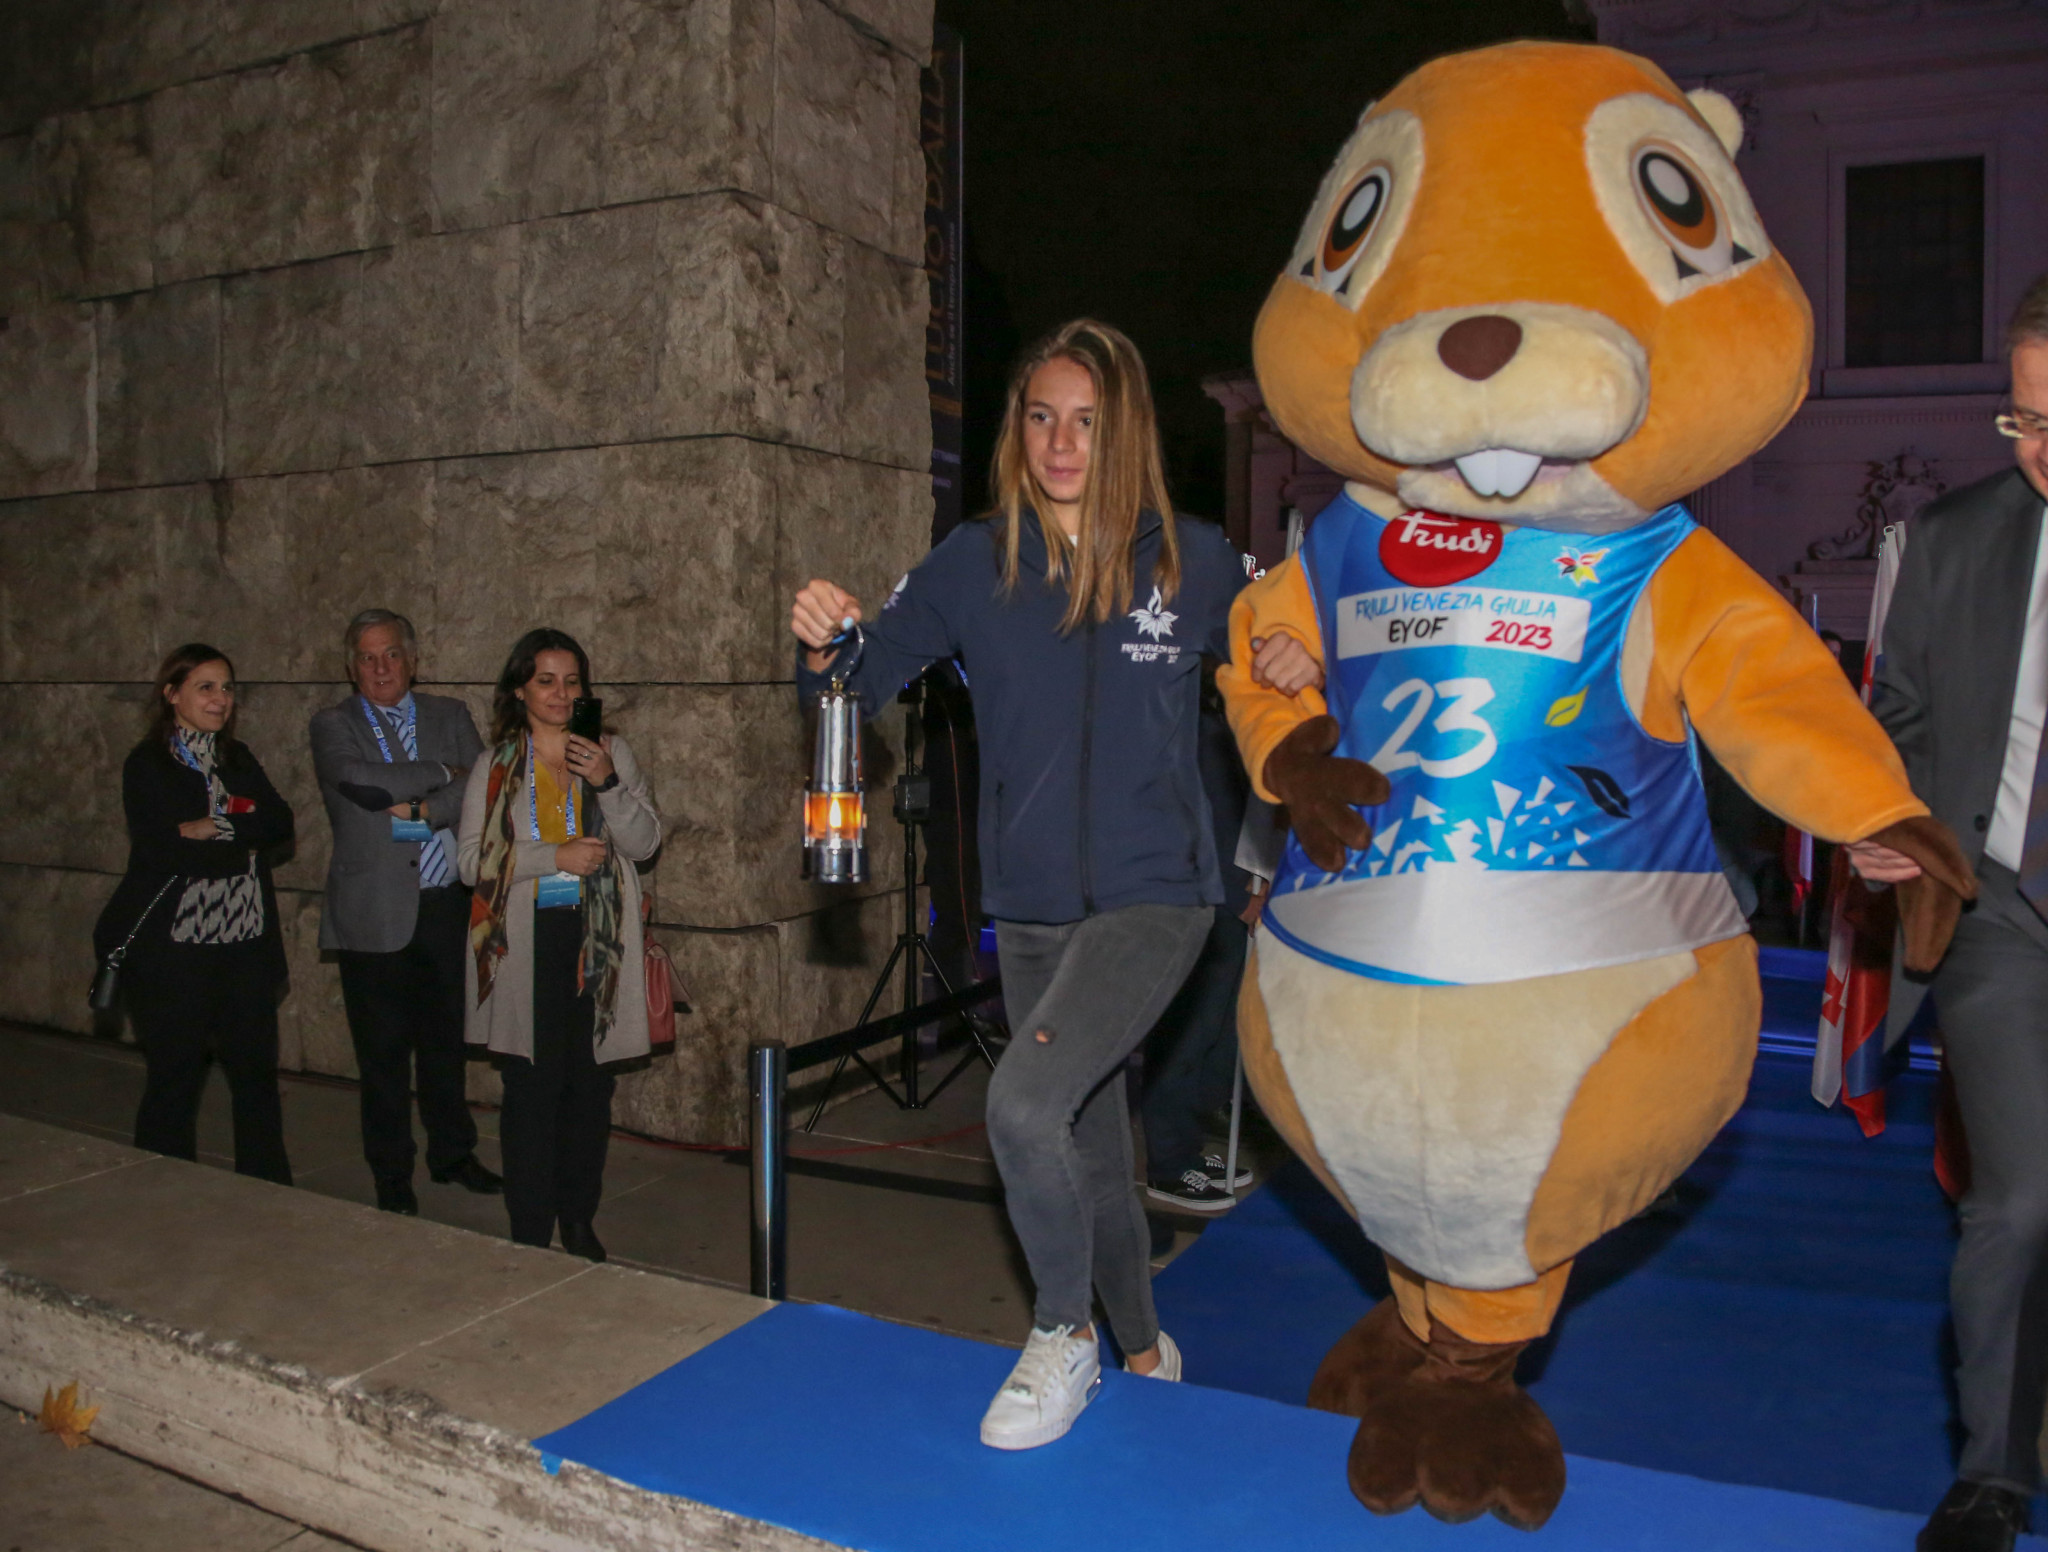 The Friuli Venezia Giulia 2023 mascot Kugy will appear at each stop of the Torch Relay ©EOC